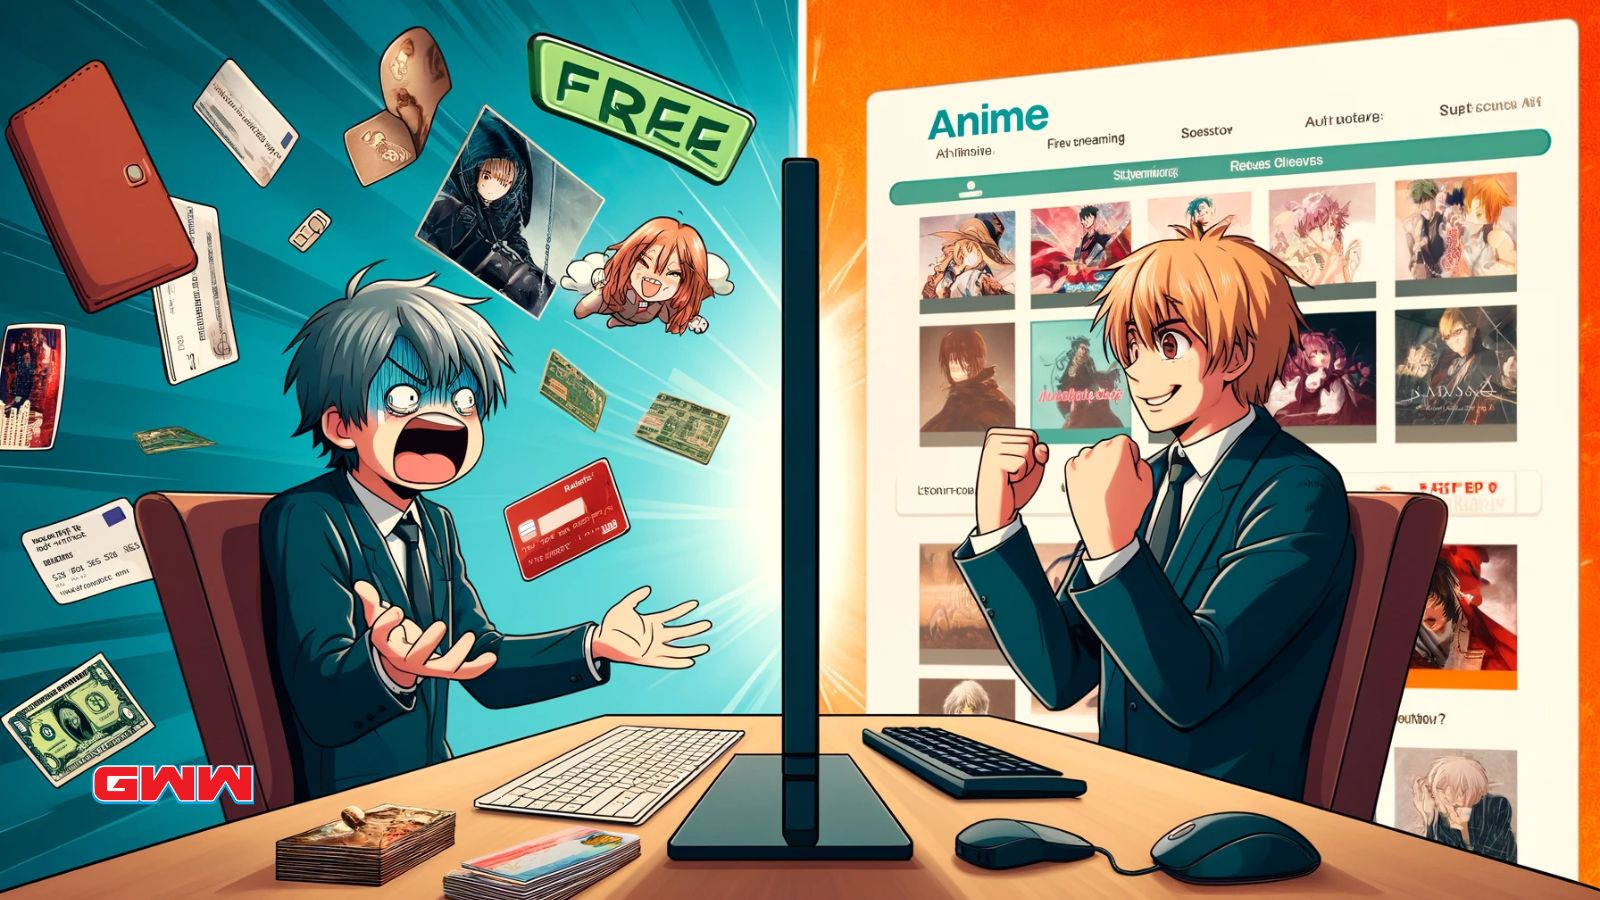 An image showing a smooth anime streaming with Chia Anime over other platforms